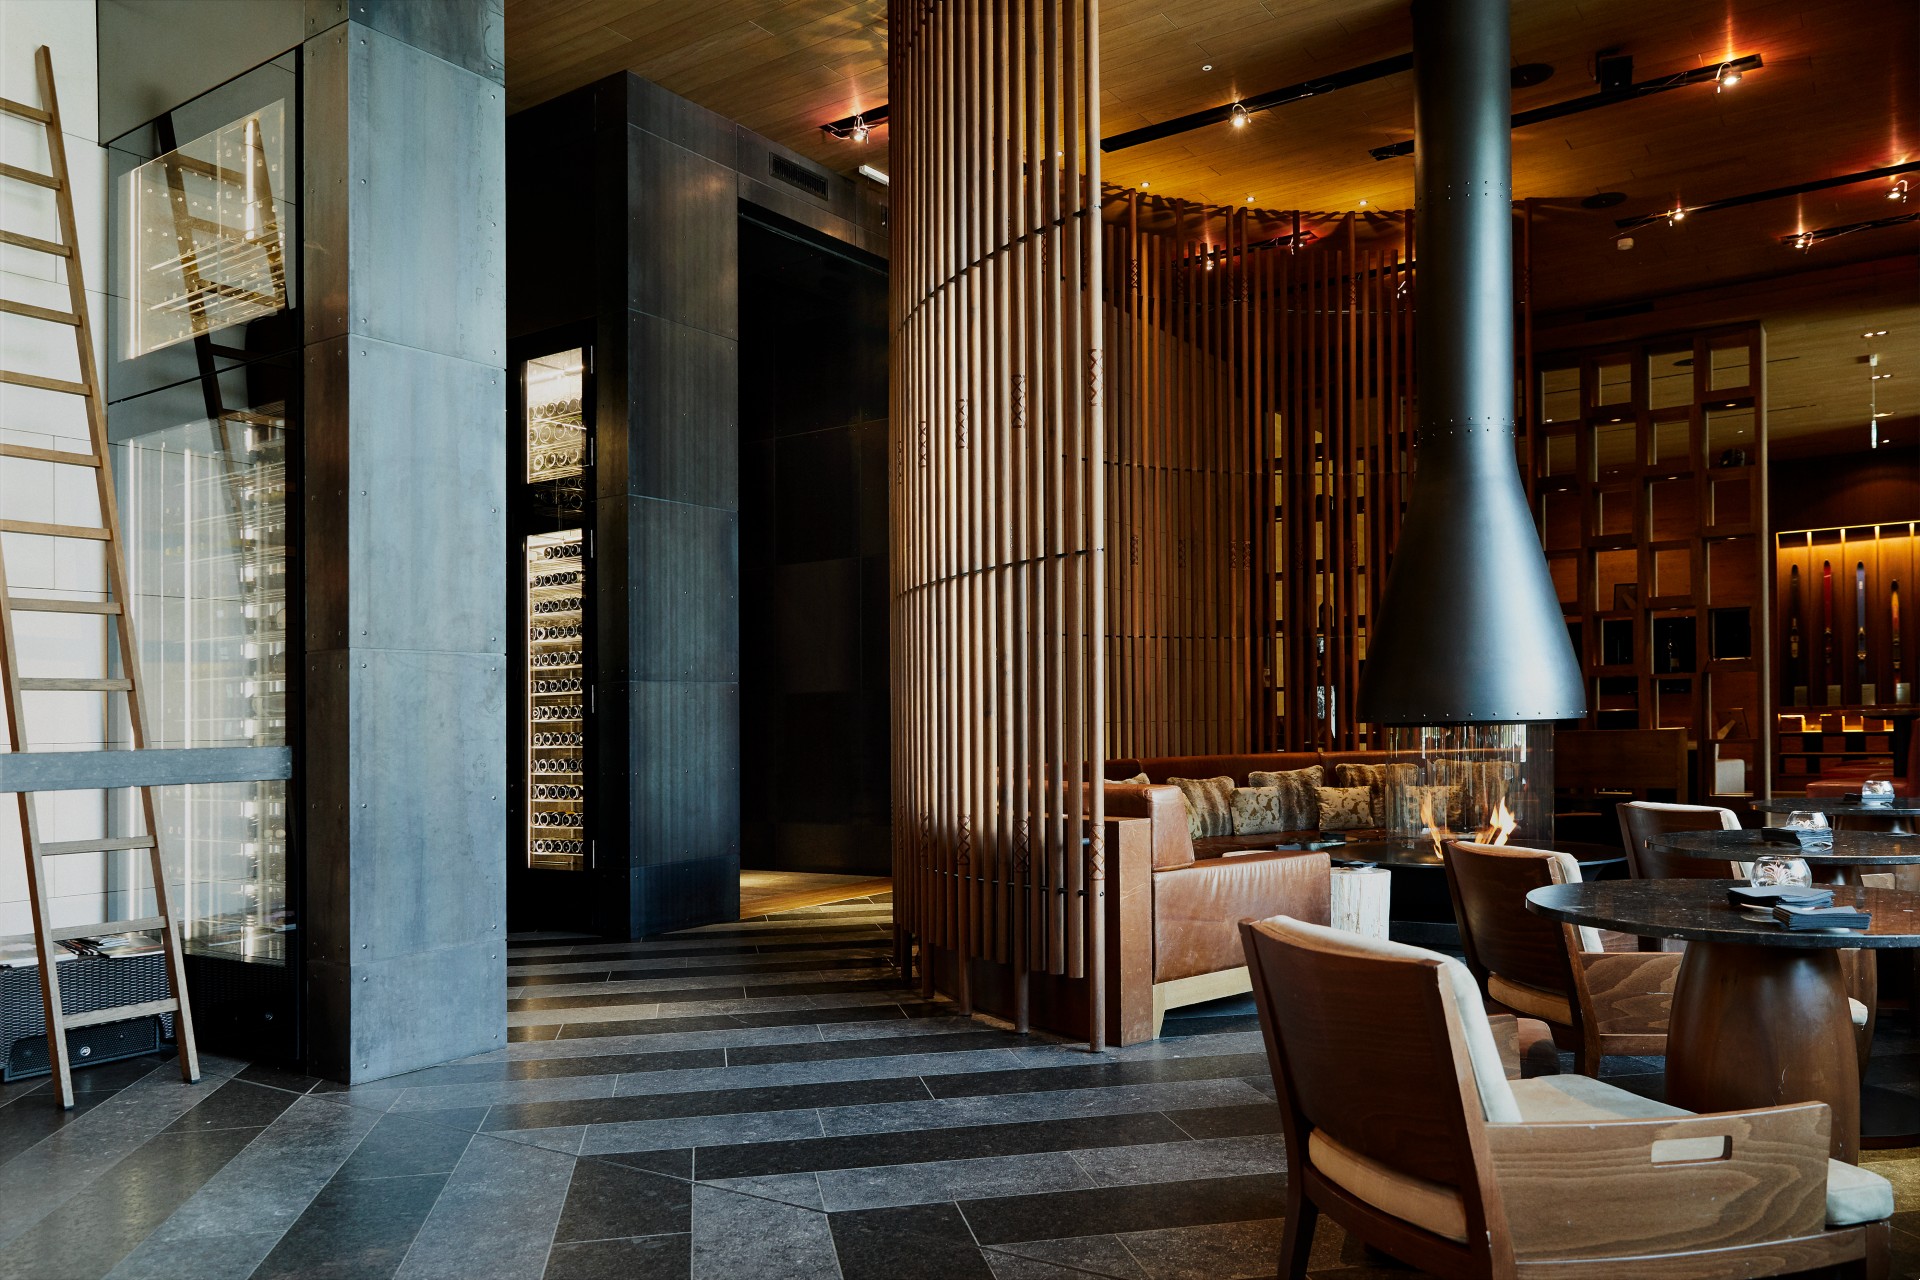 Detail of a lounge at The Chedi Andermatt. You can see storage cabinets with wine bottles on the left side and a cozy lounge with fireplace on the right side.